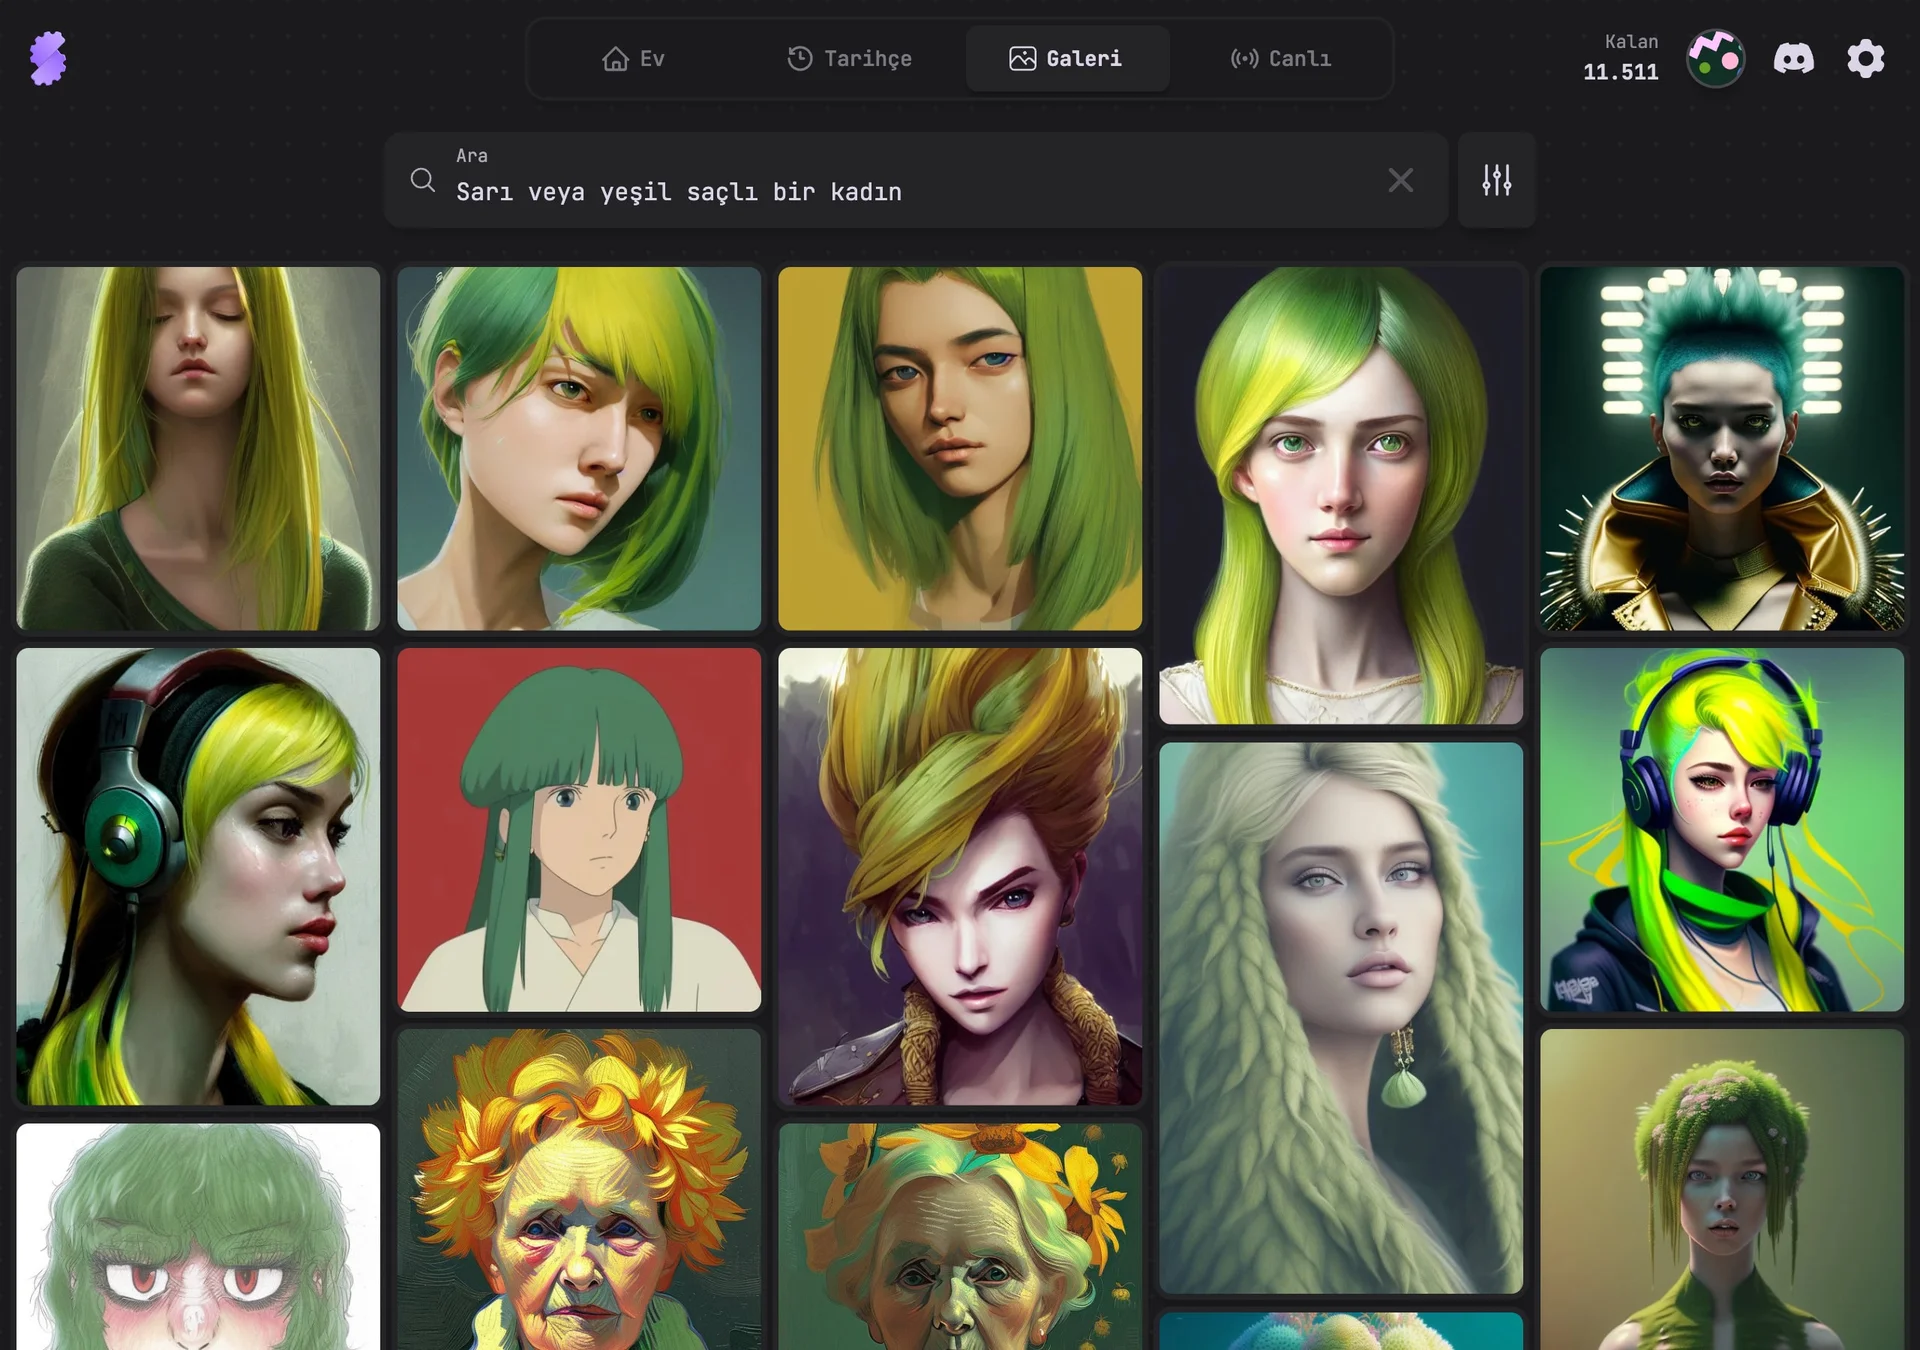 Stablecog Gallery Search: A woman with yellow or green hair